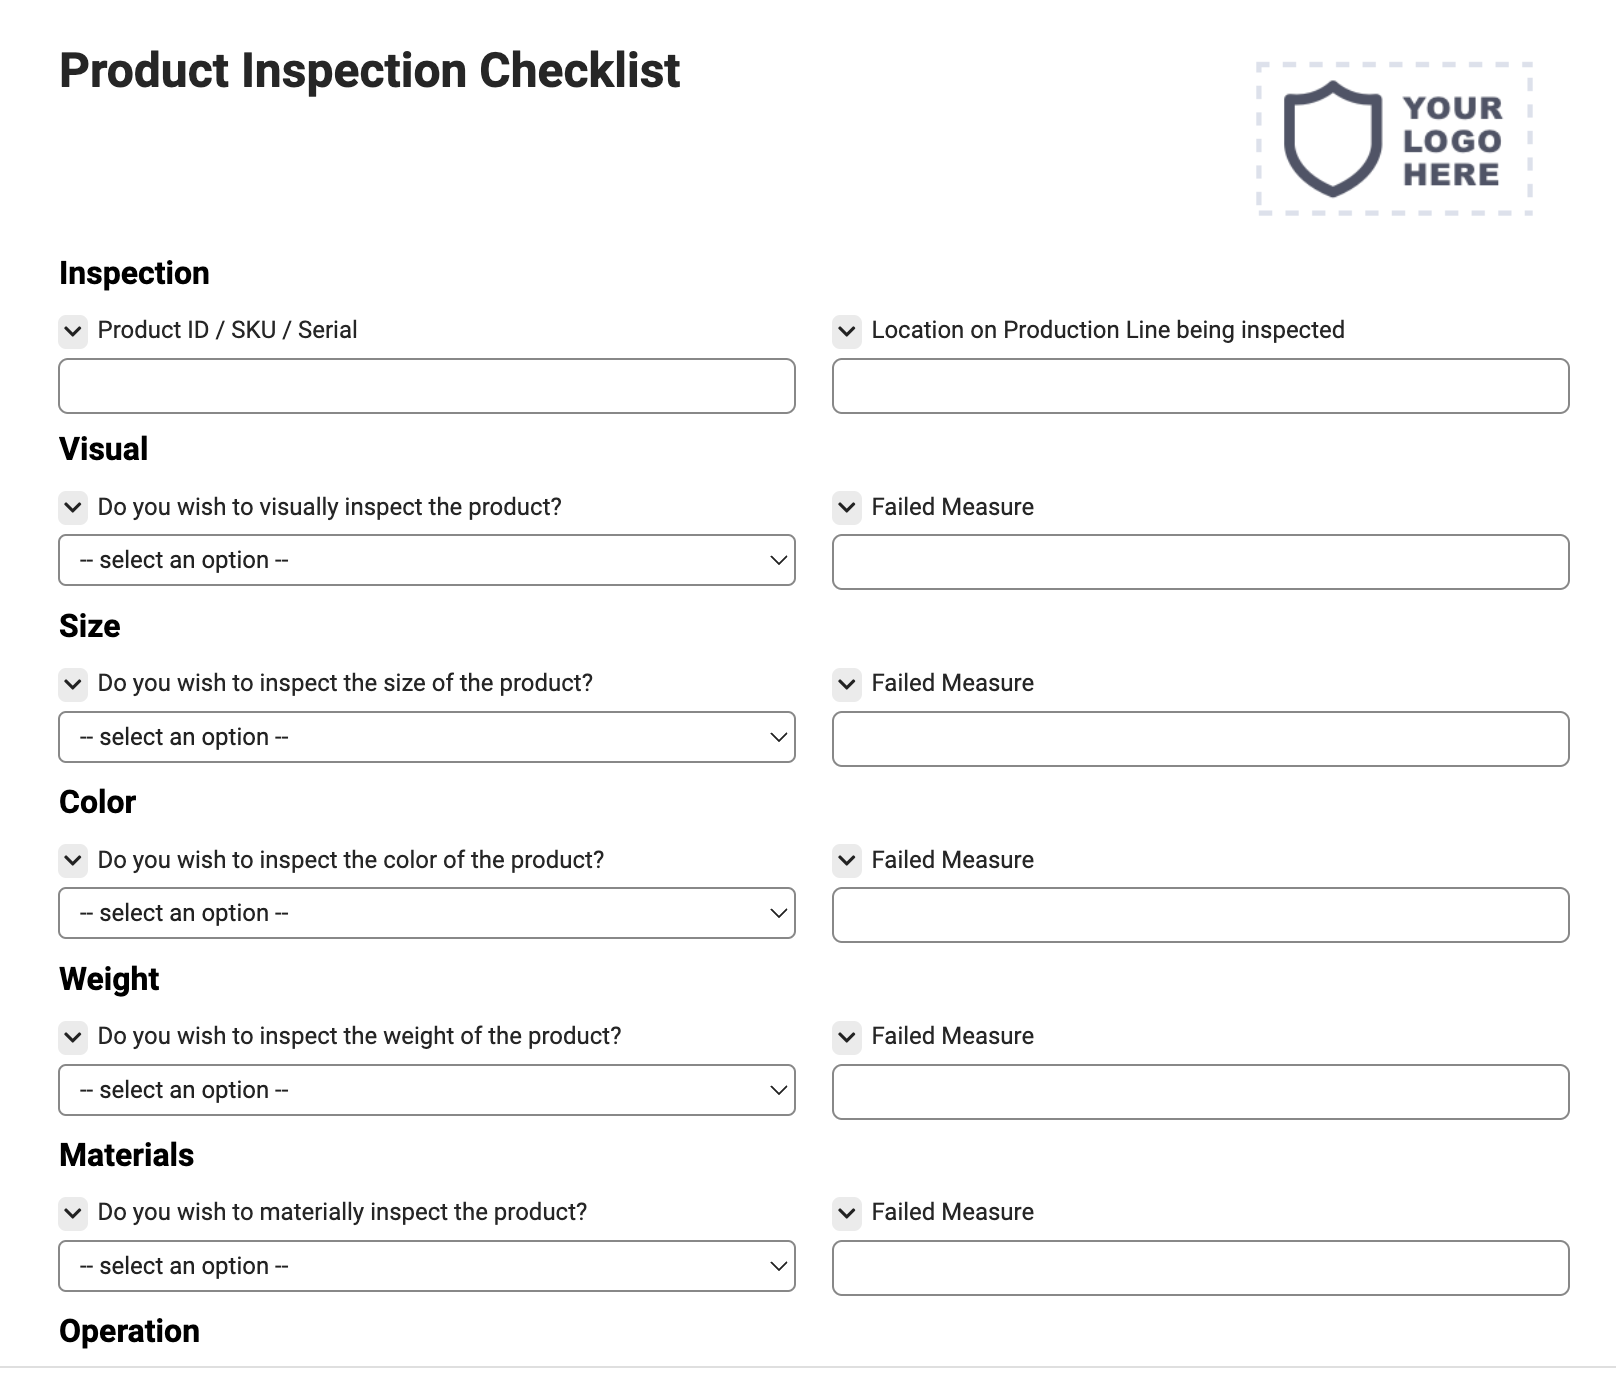 Product Inspection Checklist